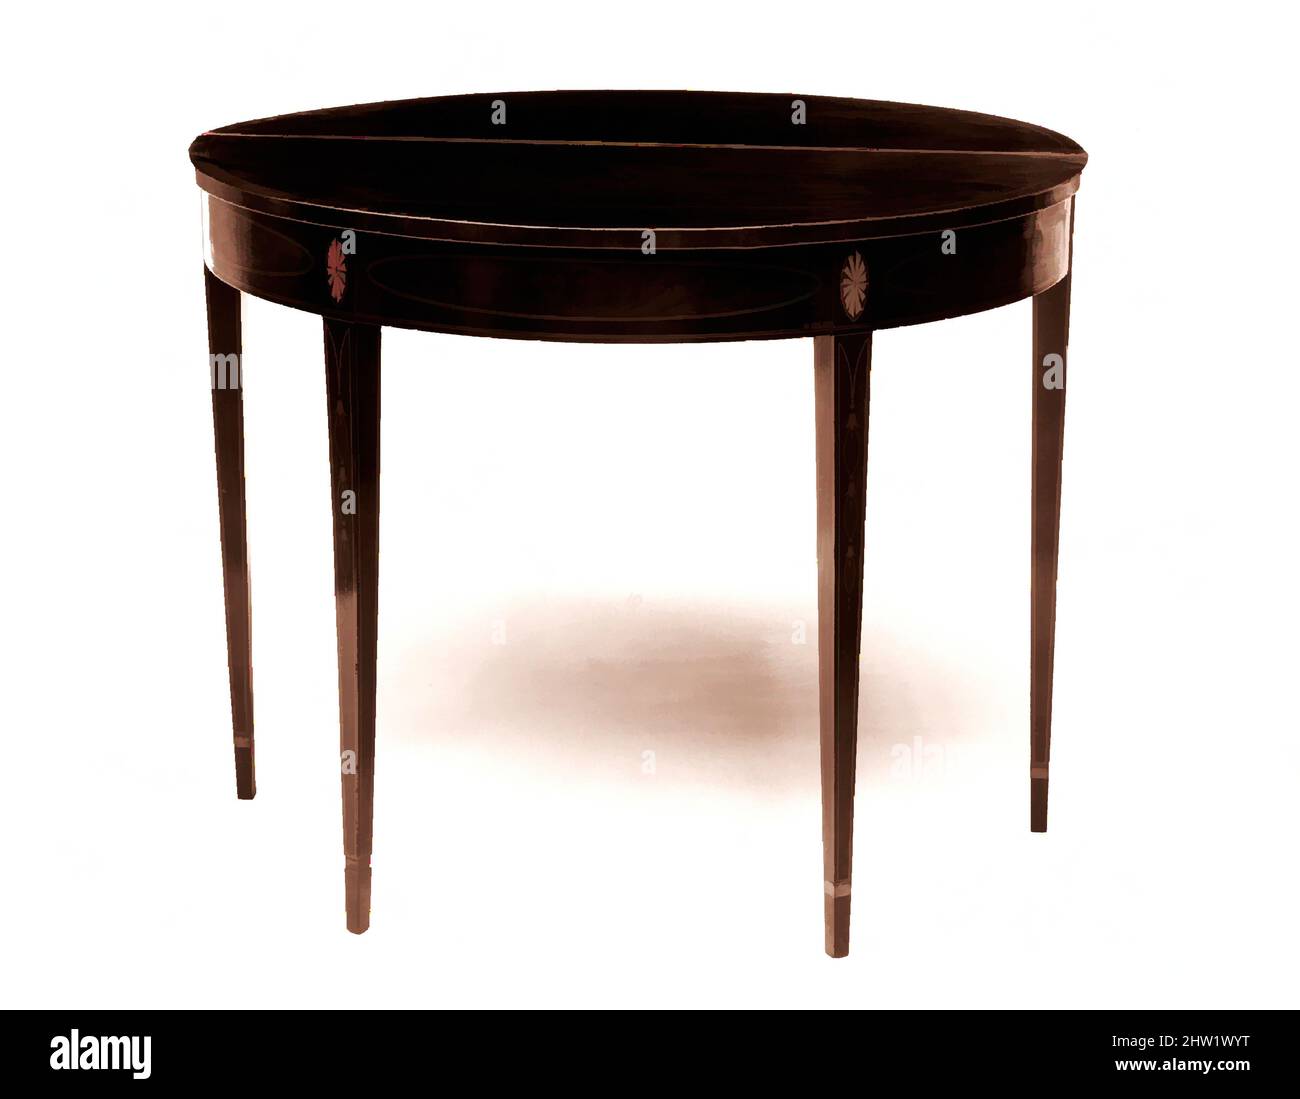 Art inspired by Card Table, 1790–1805, Made in New York, New York, United States, American, Mahogany, maple, satinwood, white pine, 36 x 57 in. (91.4 x 144.8 cm), Furniture, Classic works modernized by Artotop with a splash of modernity. Shapes, color and value, eye-catching visual impact on art. Emotions through freedom of artworks in a contemporary way. A timeless message pursuing a wildly creative new direction. Artists turning to the digital medium and creating the Artotop NFT Stock Photo